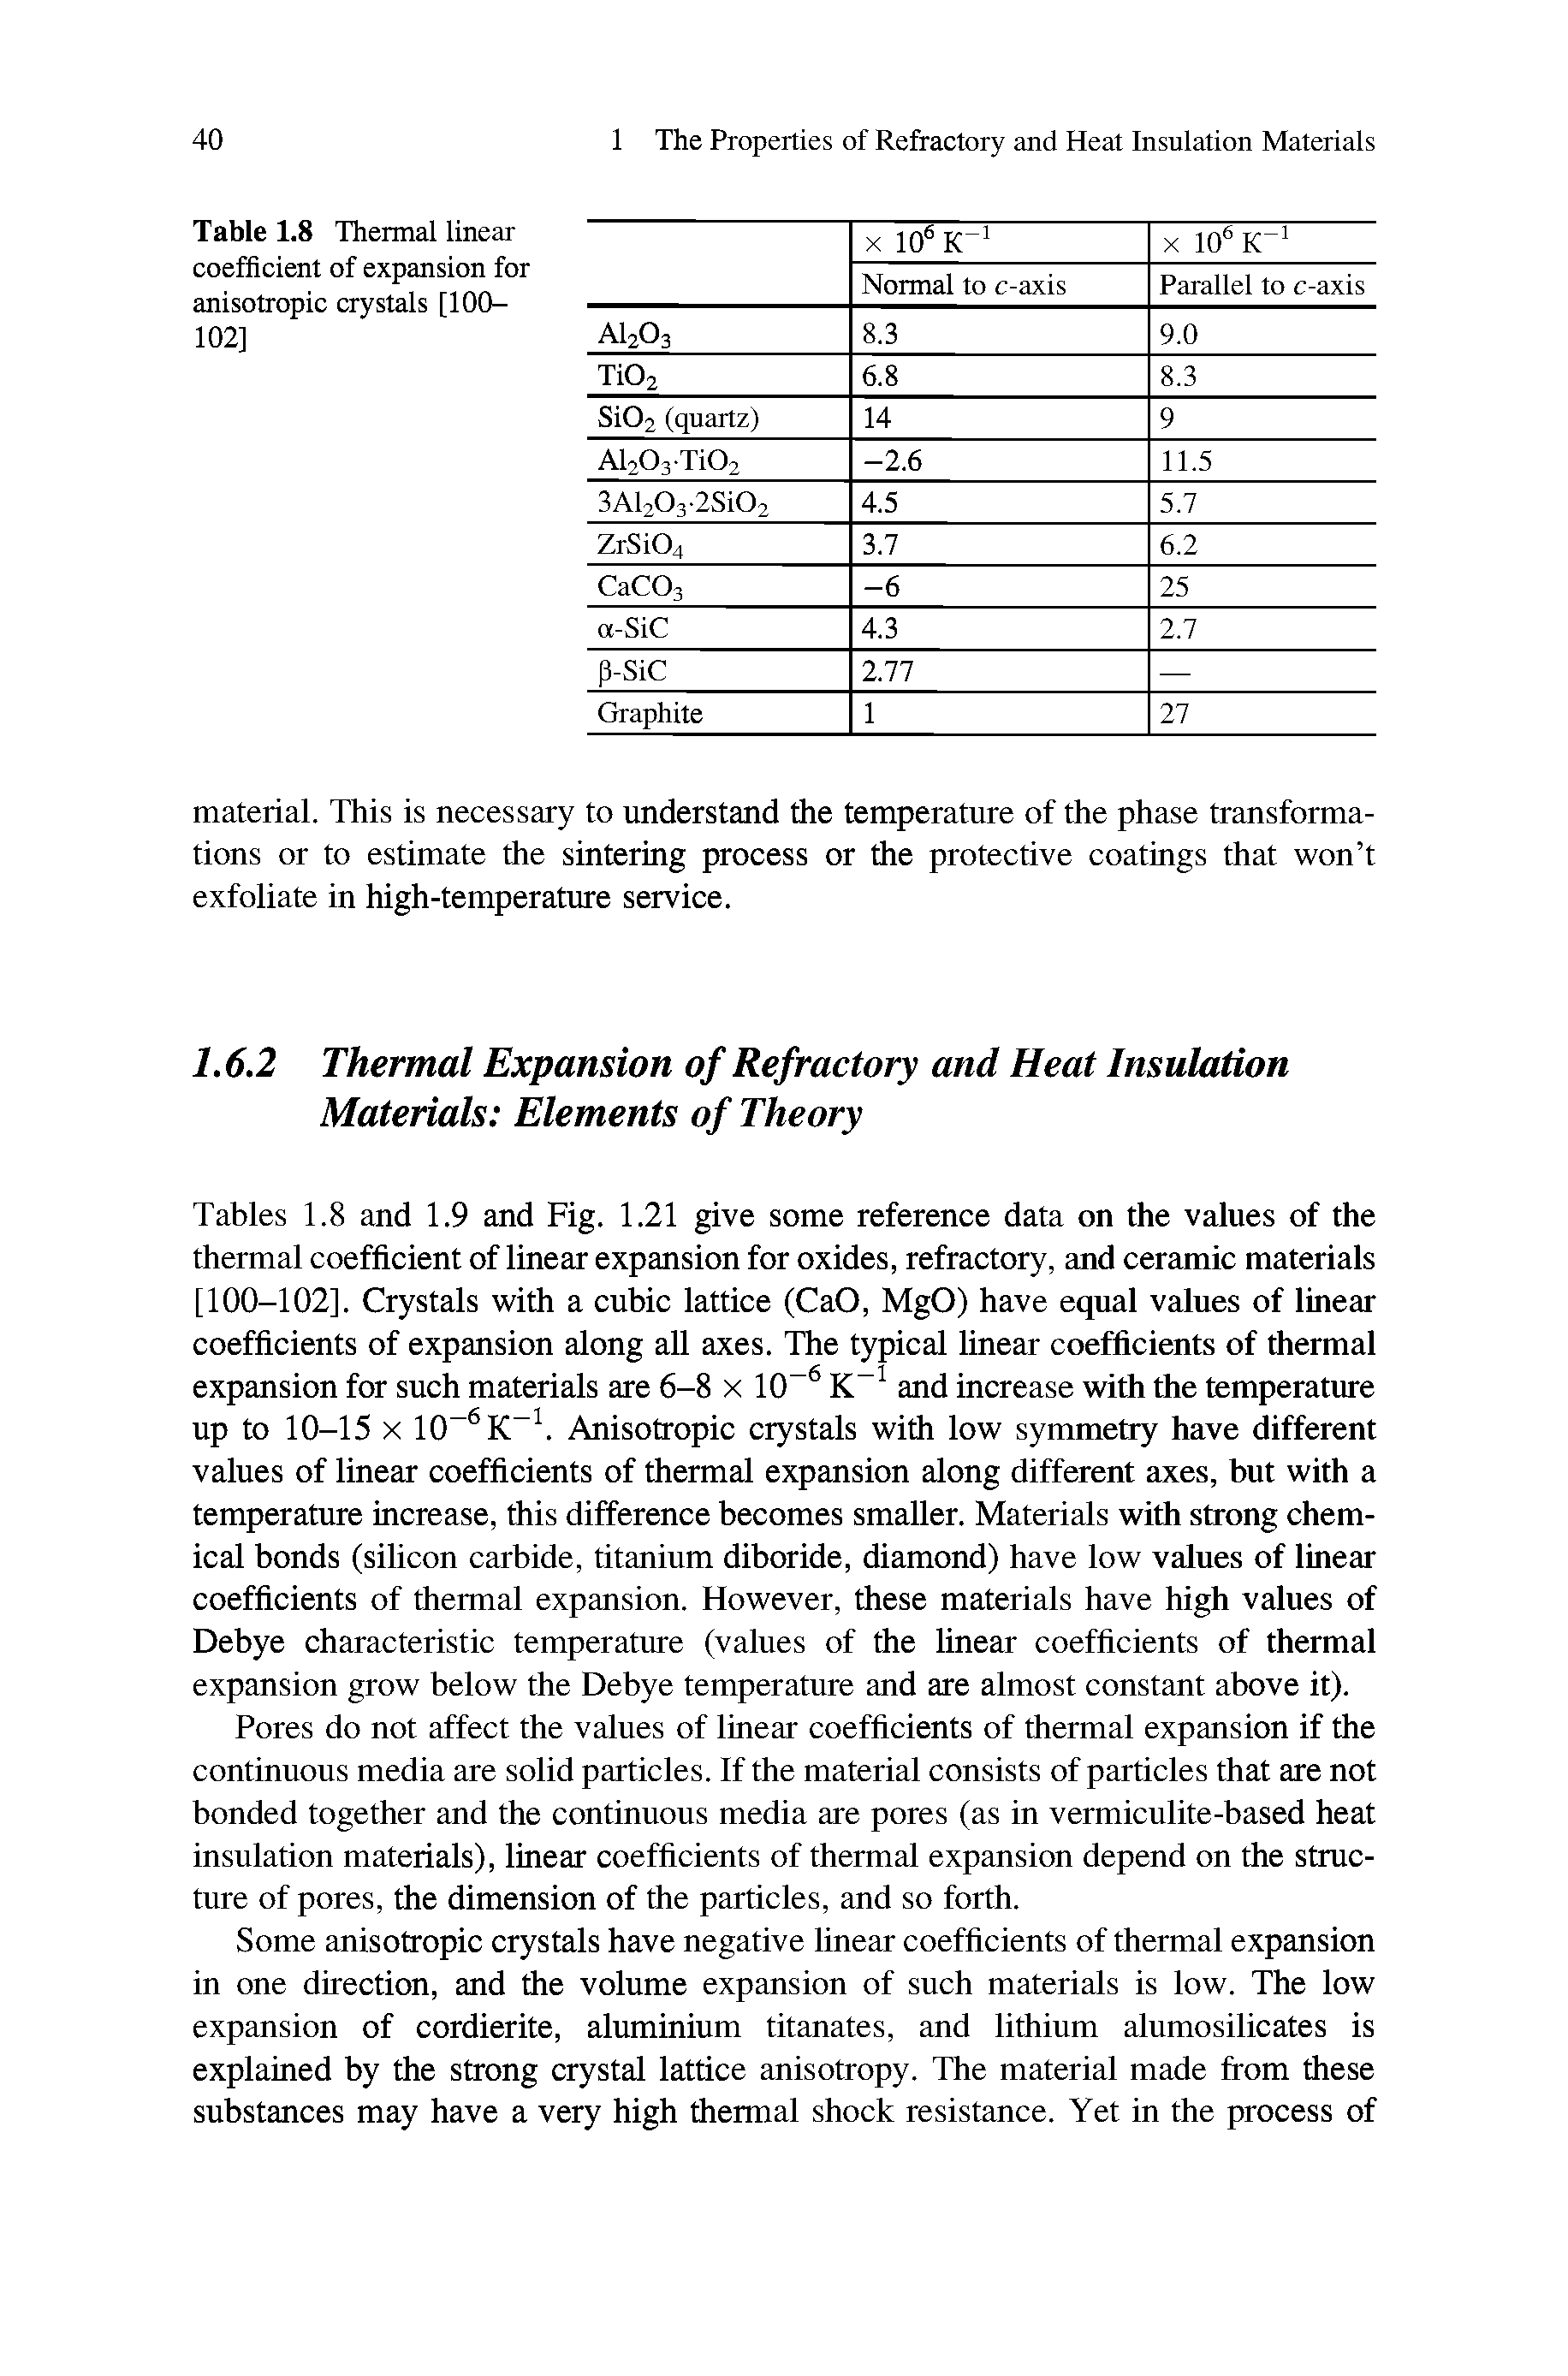 Tables 1.8 and 1.9 and Fig. 1.21 give some reference data on the values of the thermal coefficient of linear expansion for oxides, refractory, and ceramic materials [100-102]. Crystals with a cubic lattice (CaO, MgO) have equal values of linear coefficients of expansion along aU axes. The typical linear coefficients of thermal expansion for such materials are 6-8 x 10 and increase with the temperature up to 10-15 X 10 K . Anisotropic crystals with low symmetry have different values of linear coefficients of thermal expansion along different axes, but with a temperature increase, this difference becomes smaller. Materials with strong chemical bonds (silicon carbide, titanium diboride, diamond) have low values of linear coefficients of thermal expansion. However, these materials have high values of Debye characteristic temperature (values of the linear coefficients of thermal expansion grow below the Debye temperature and are almost constant above it).